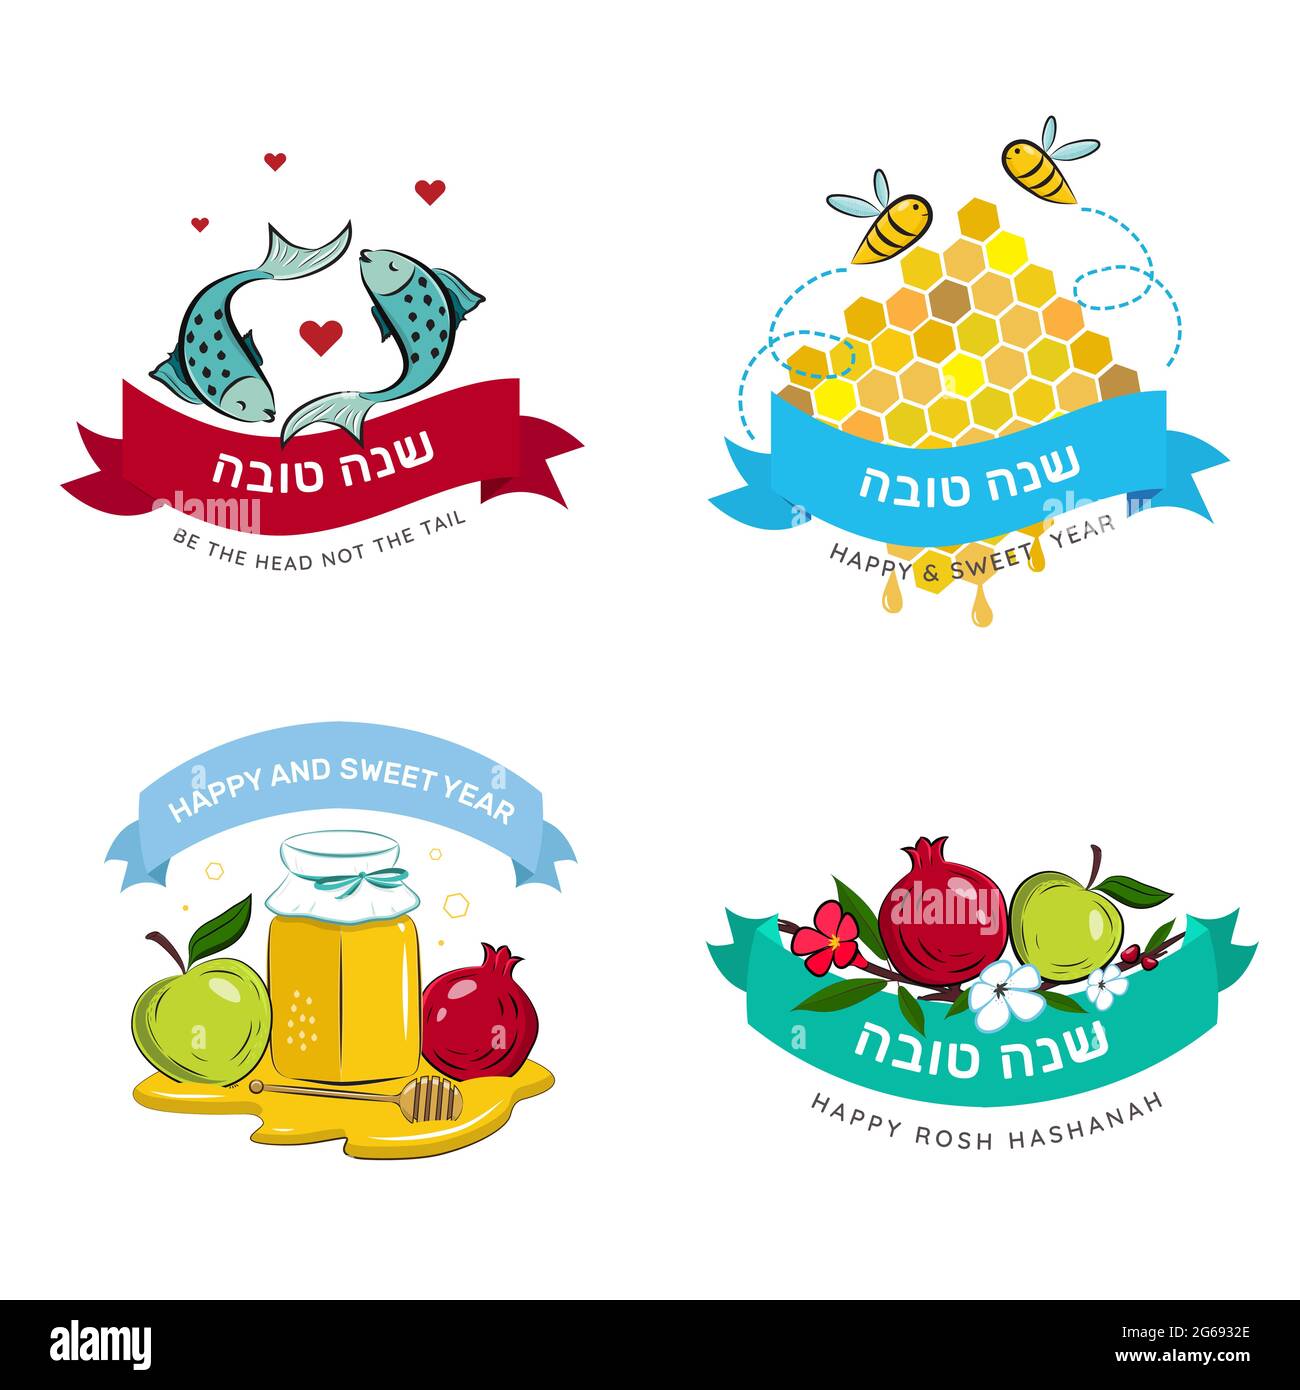 Rosh Hashanah Jewish holiday greeting cards badges with traditional greetings and symbols, apple, pomegranate, honey, fish. Happy new year in Hebrew. Stock Vector